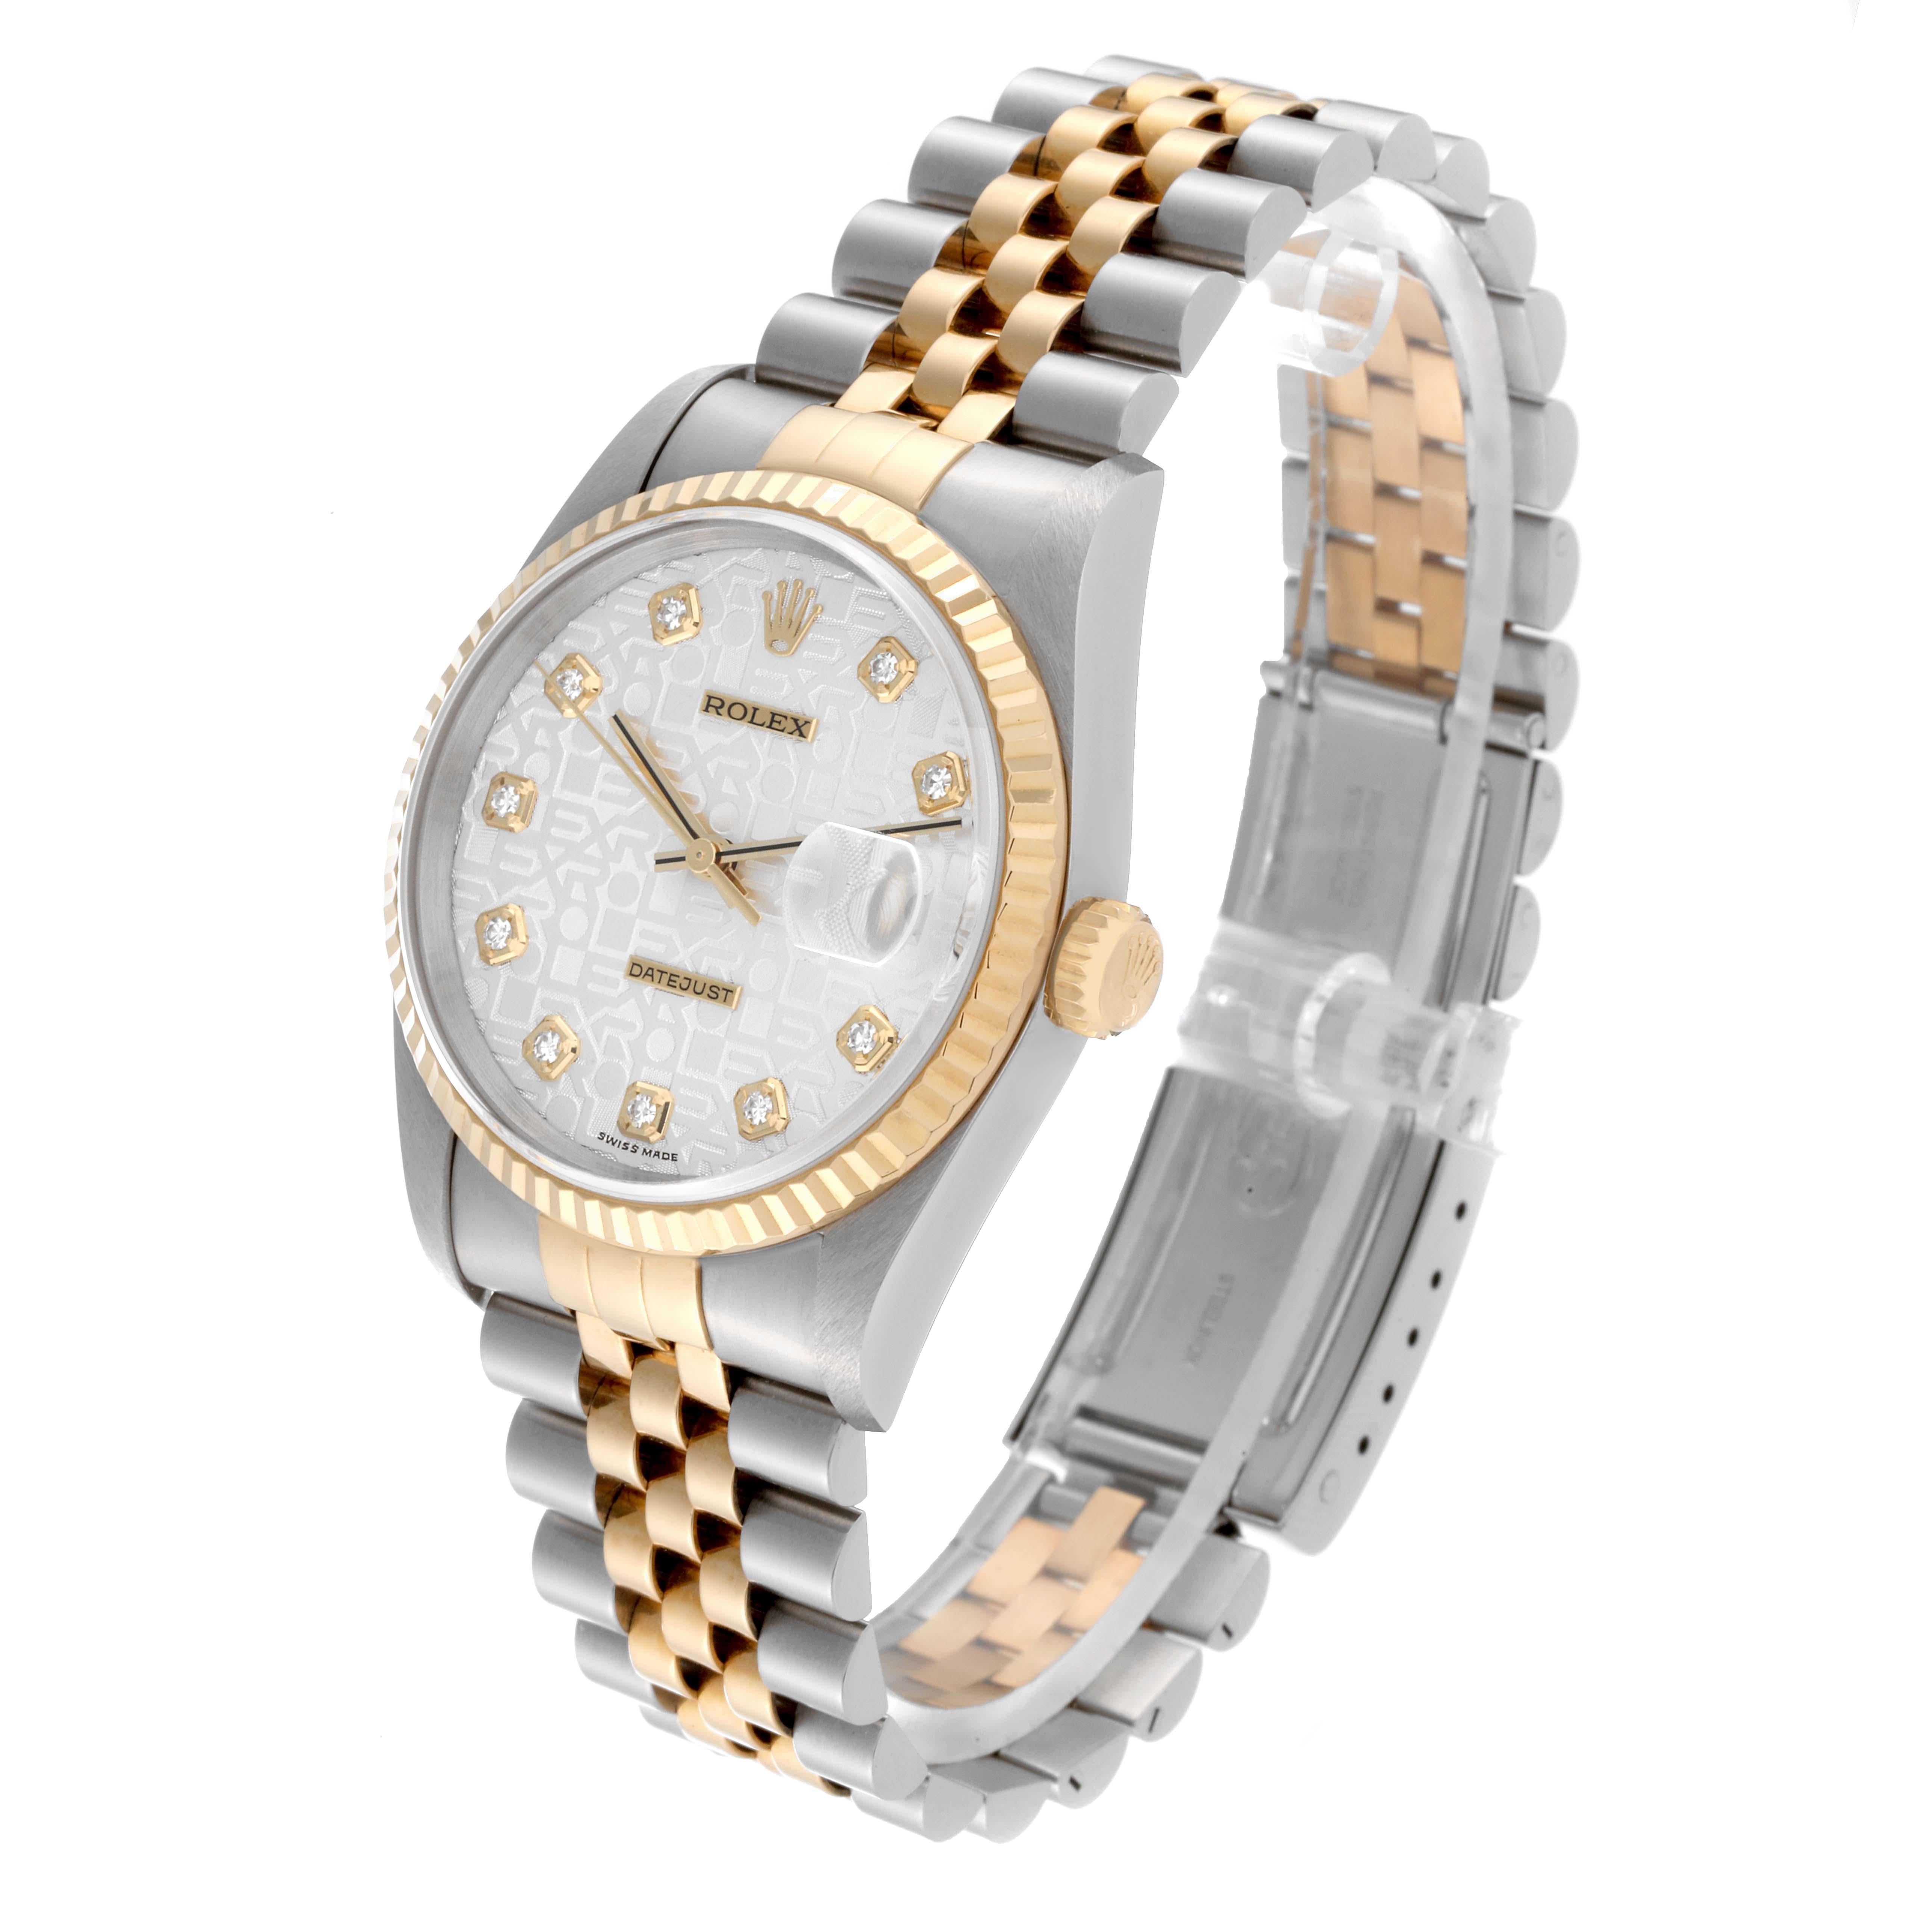 Rolex Datejust Anniversary Diamond Dial Steel Yellow Gold Watch 16233 Box Papers 3